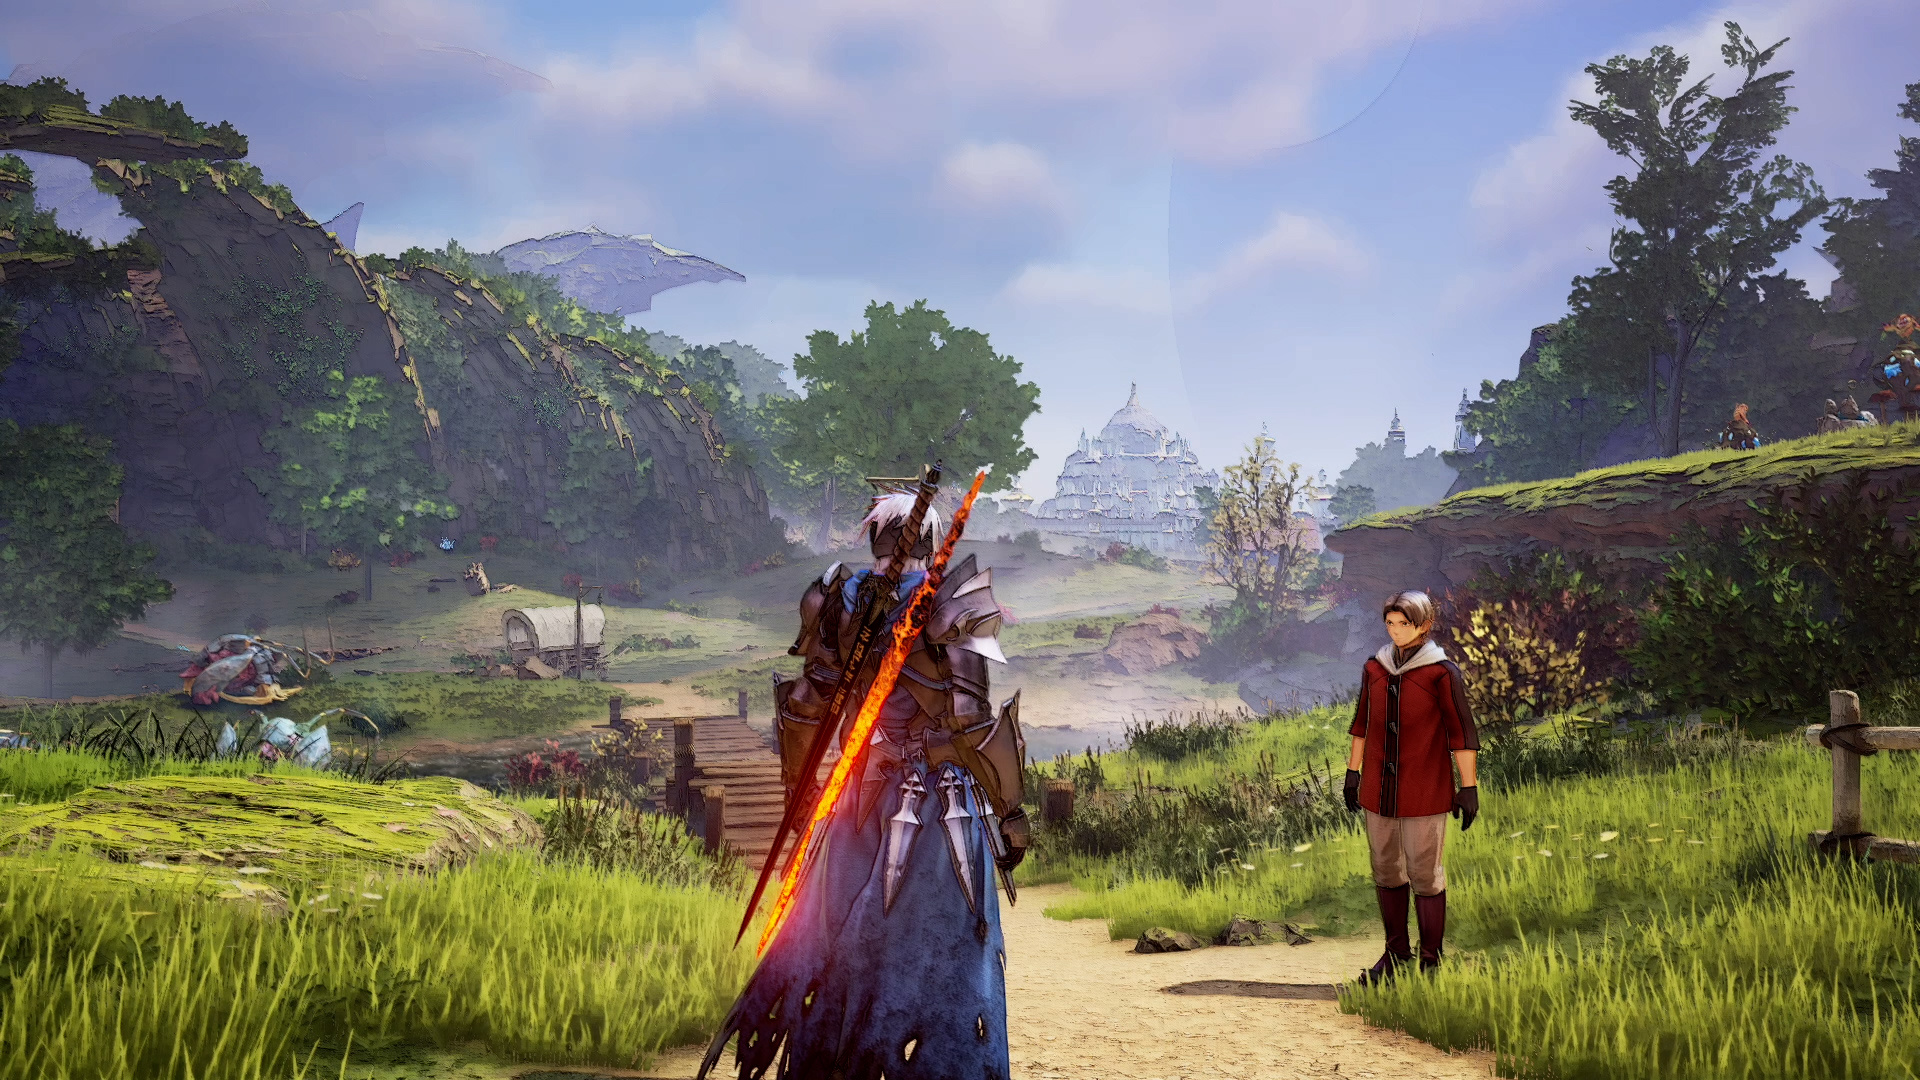 Tales of Arise - Reviews